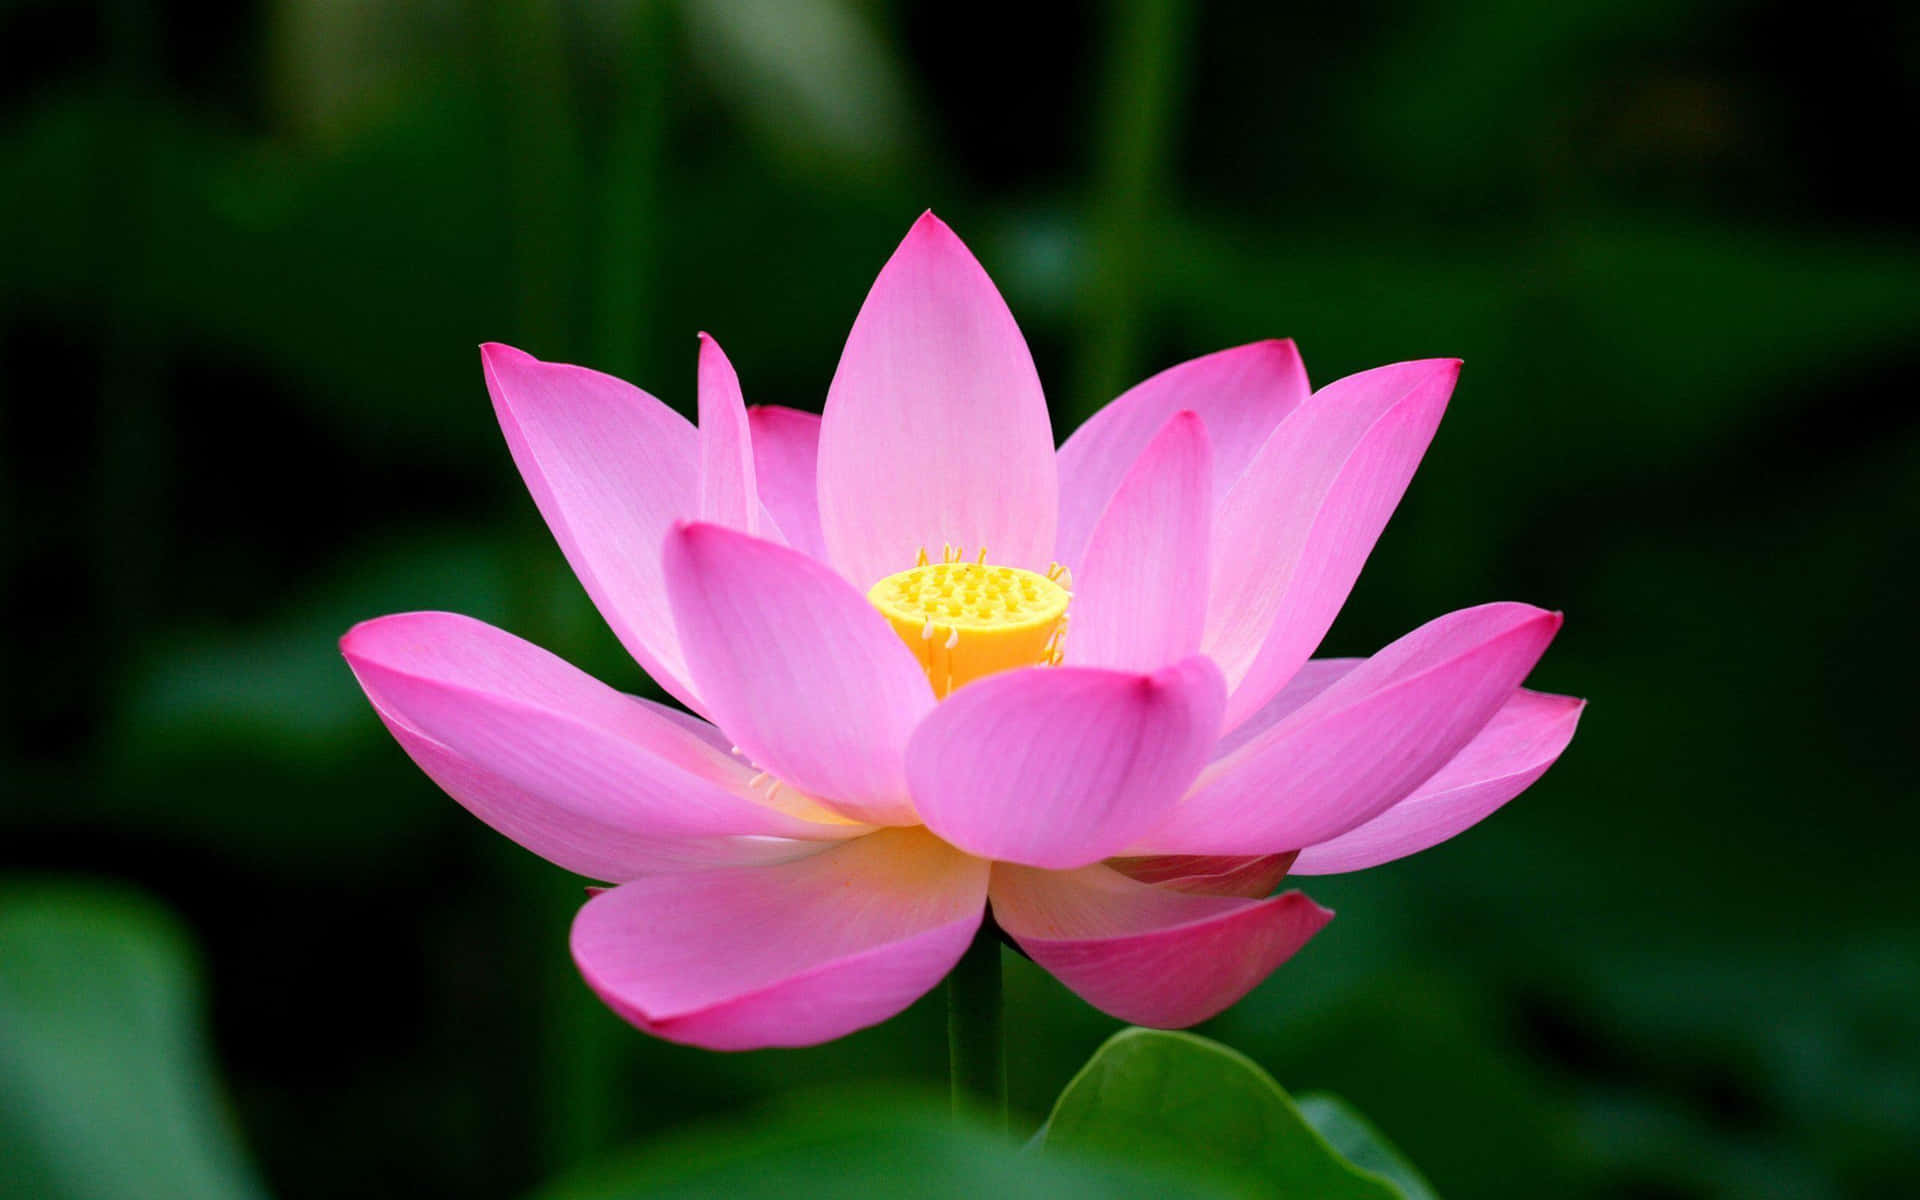 A beautiful lotus flower in the middle of a lake.